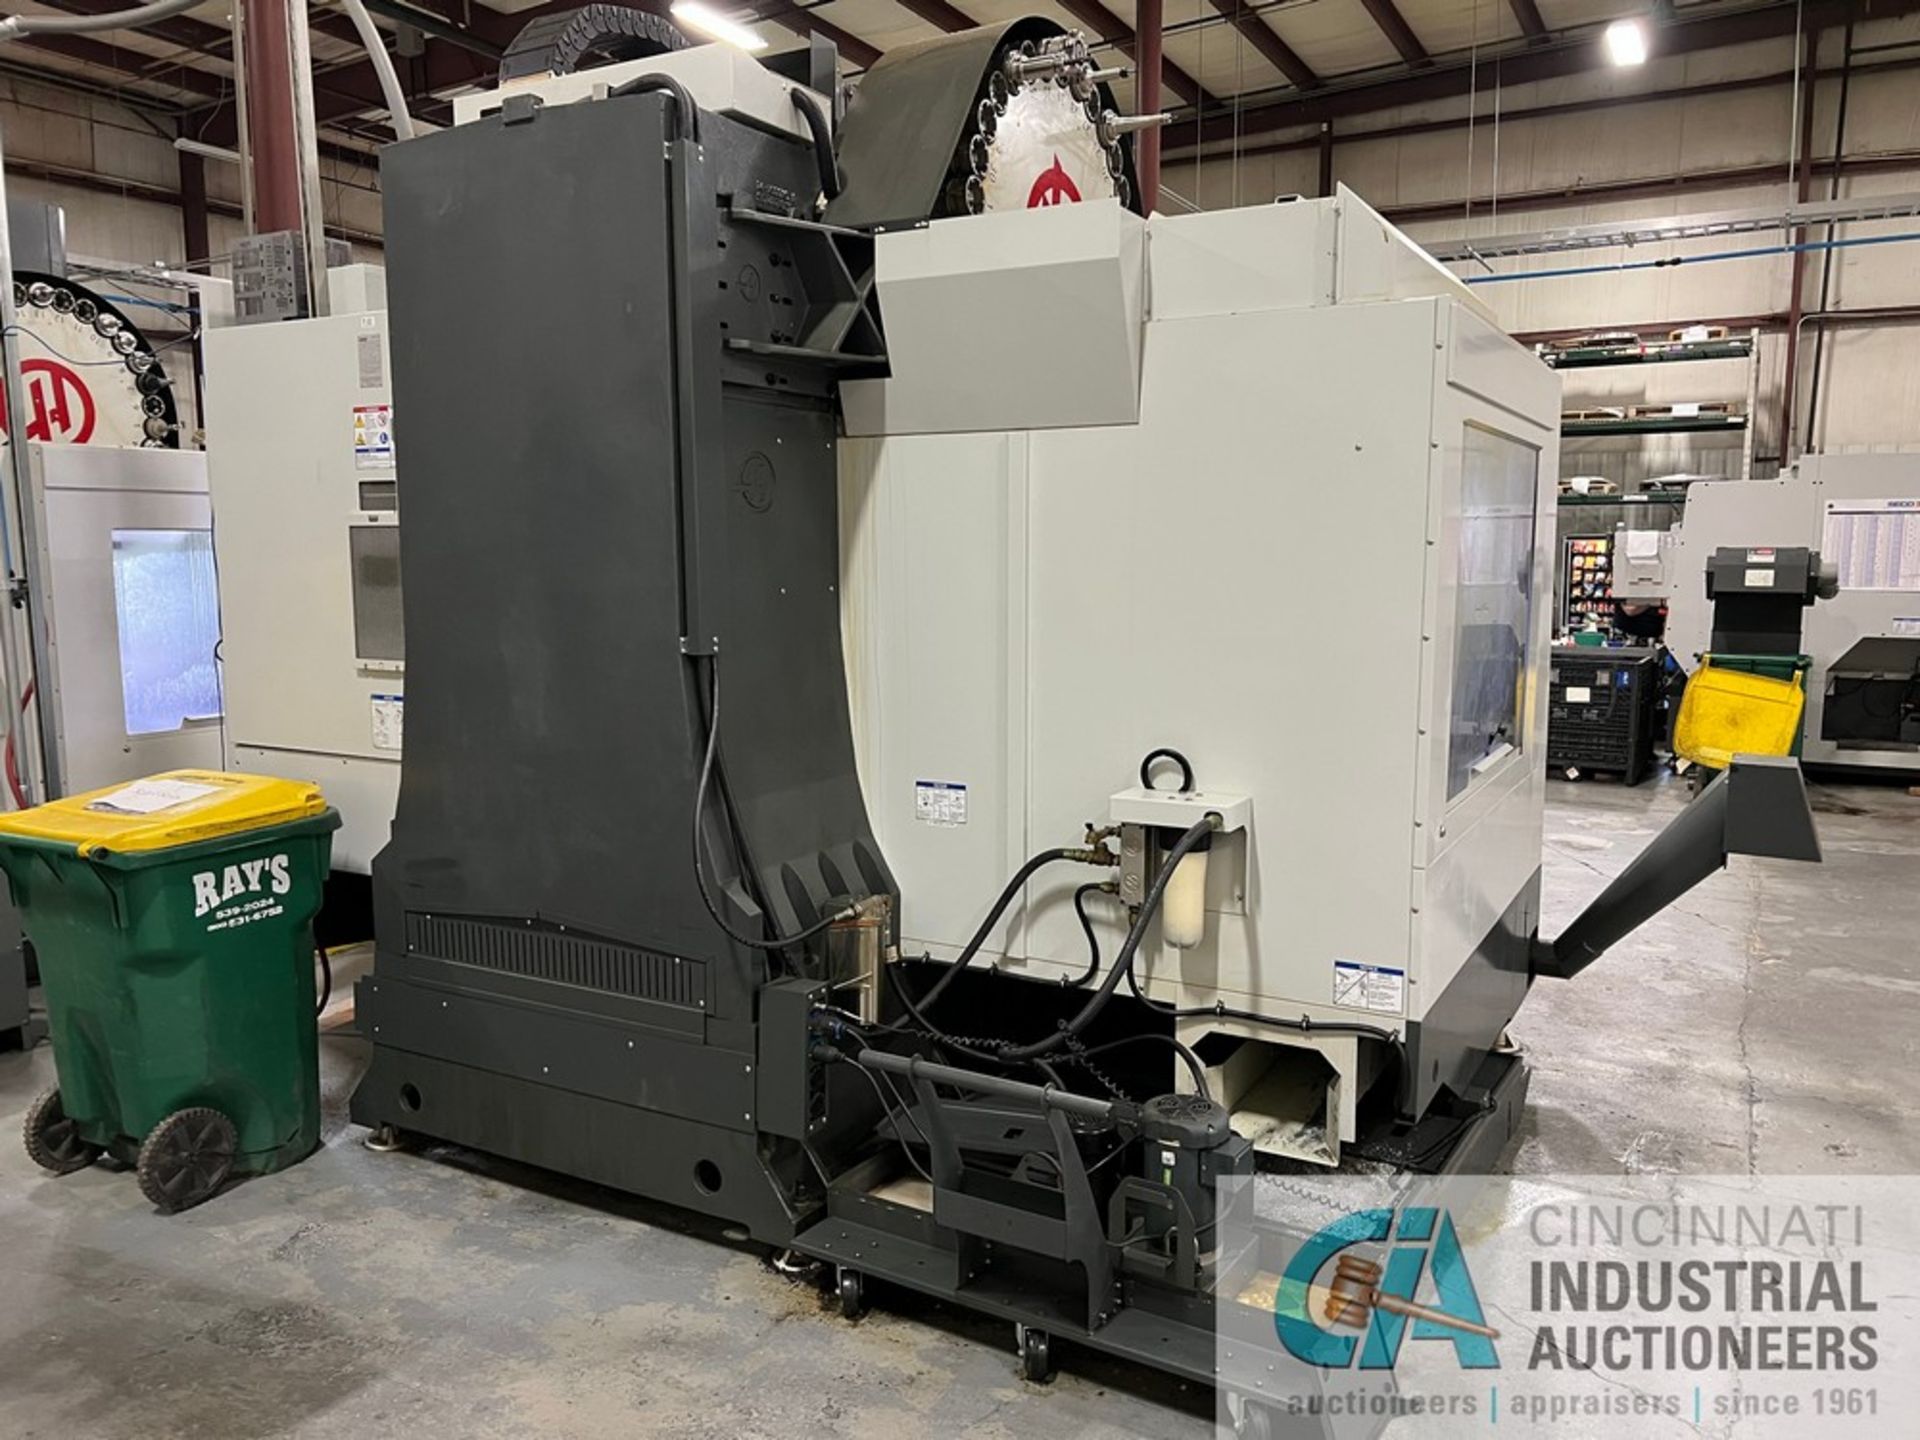 Haas Model VF-6 CNC Vertical Machining Center (2015) 3,558 Cutting Hours Showing - Image 12 of 16